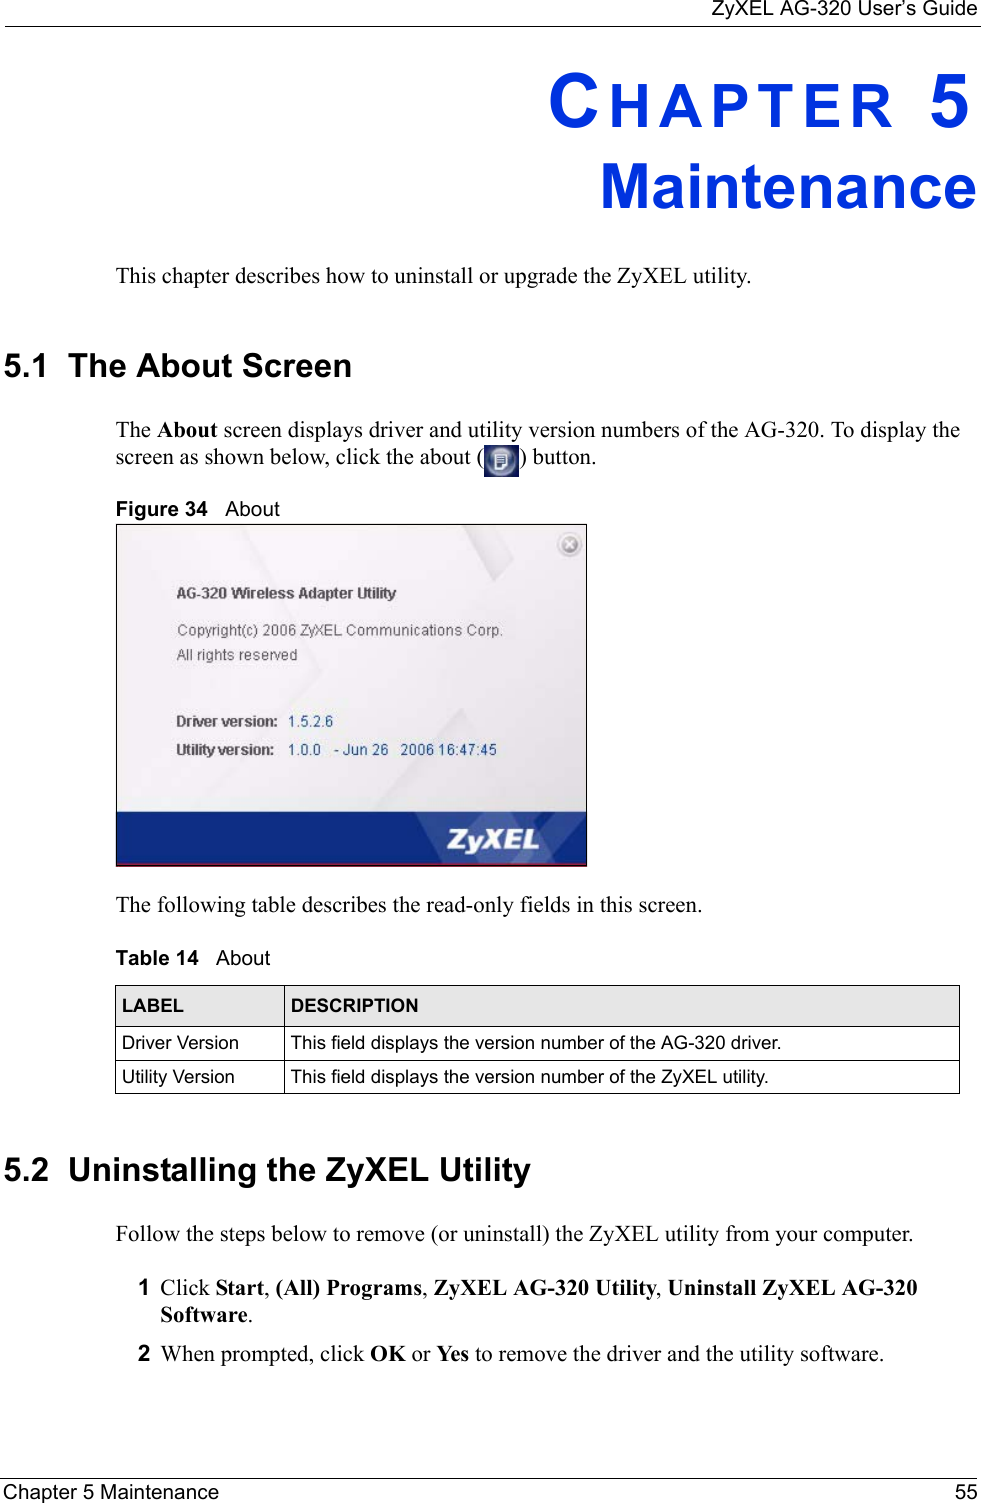 ZyXEL AG-320 User’s GuideChapter 5 Maintenance 55CHAPTER 5MaintenanceThis chapter describes how to uninstall or upgrade the ZyXEL utility.5.1  The About Screen The About screen displays driver and utility version numbers of the AG-320. To display the screen as shown below, click the about ( ) button.Figure 34   About The following table describes the read-only fields in this screen. 5.2  Uninstalling the ZyXEL Utility Follow the steps below to remove (or uninstall) the ZyXEL utility from your computer.1Click Start, (All) Programs, ZyXEL AG-320 Utility, Uninstall ZyXEL AG-320 Software.2When prompted, click OK or Yes to remove the driver and the utility software.Table 14   About LABEL DESCRIPTIONDriver Version This field displays the version number of the AG-320 driver.Utility Version This field displays the version number of the ZyXEL utility.